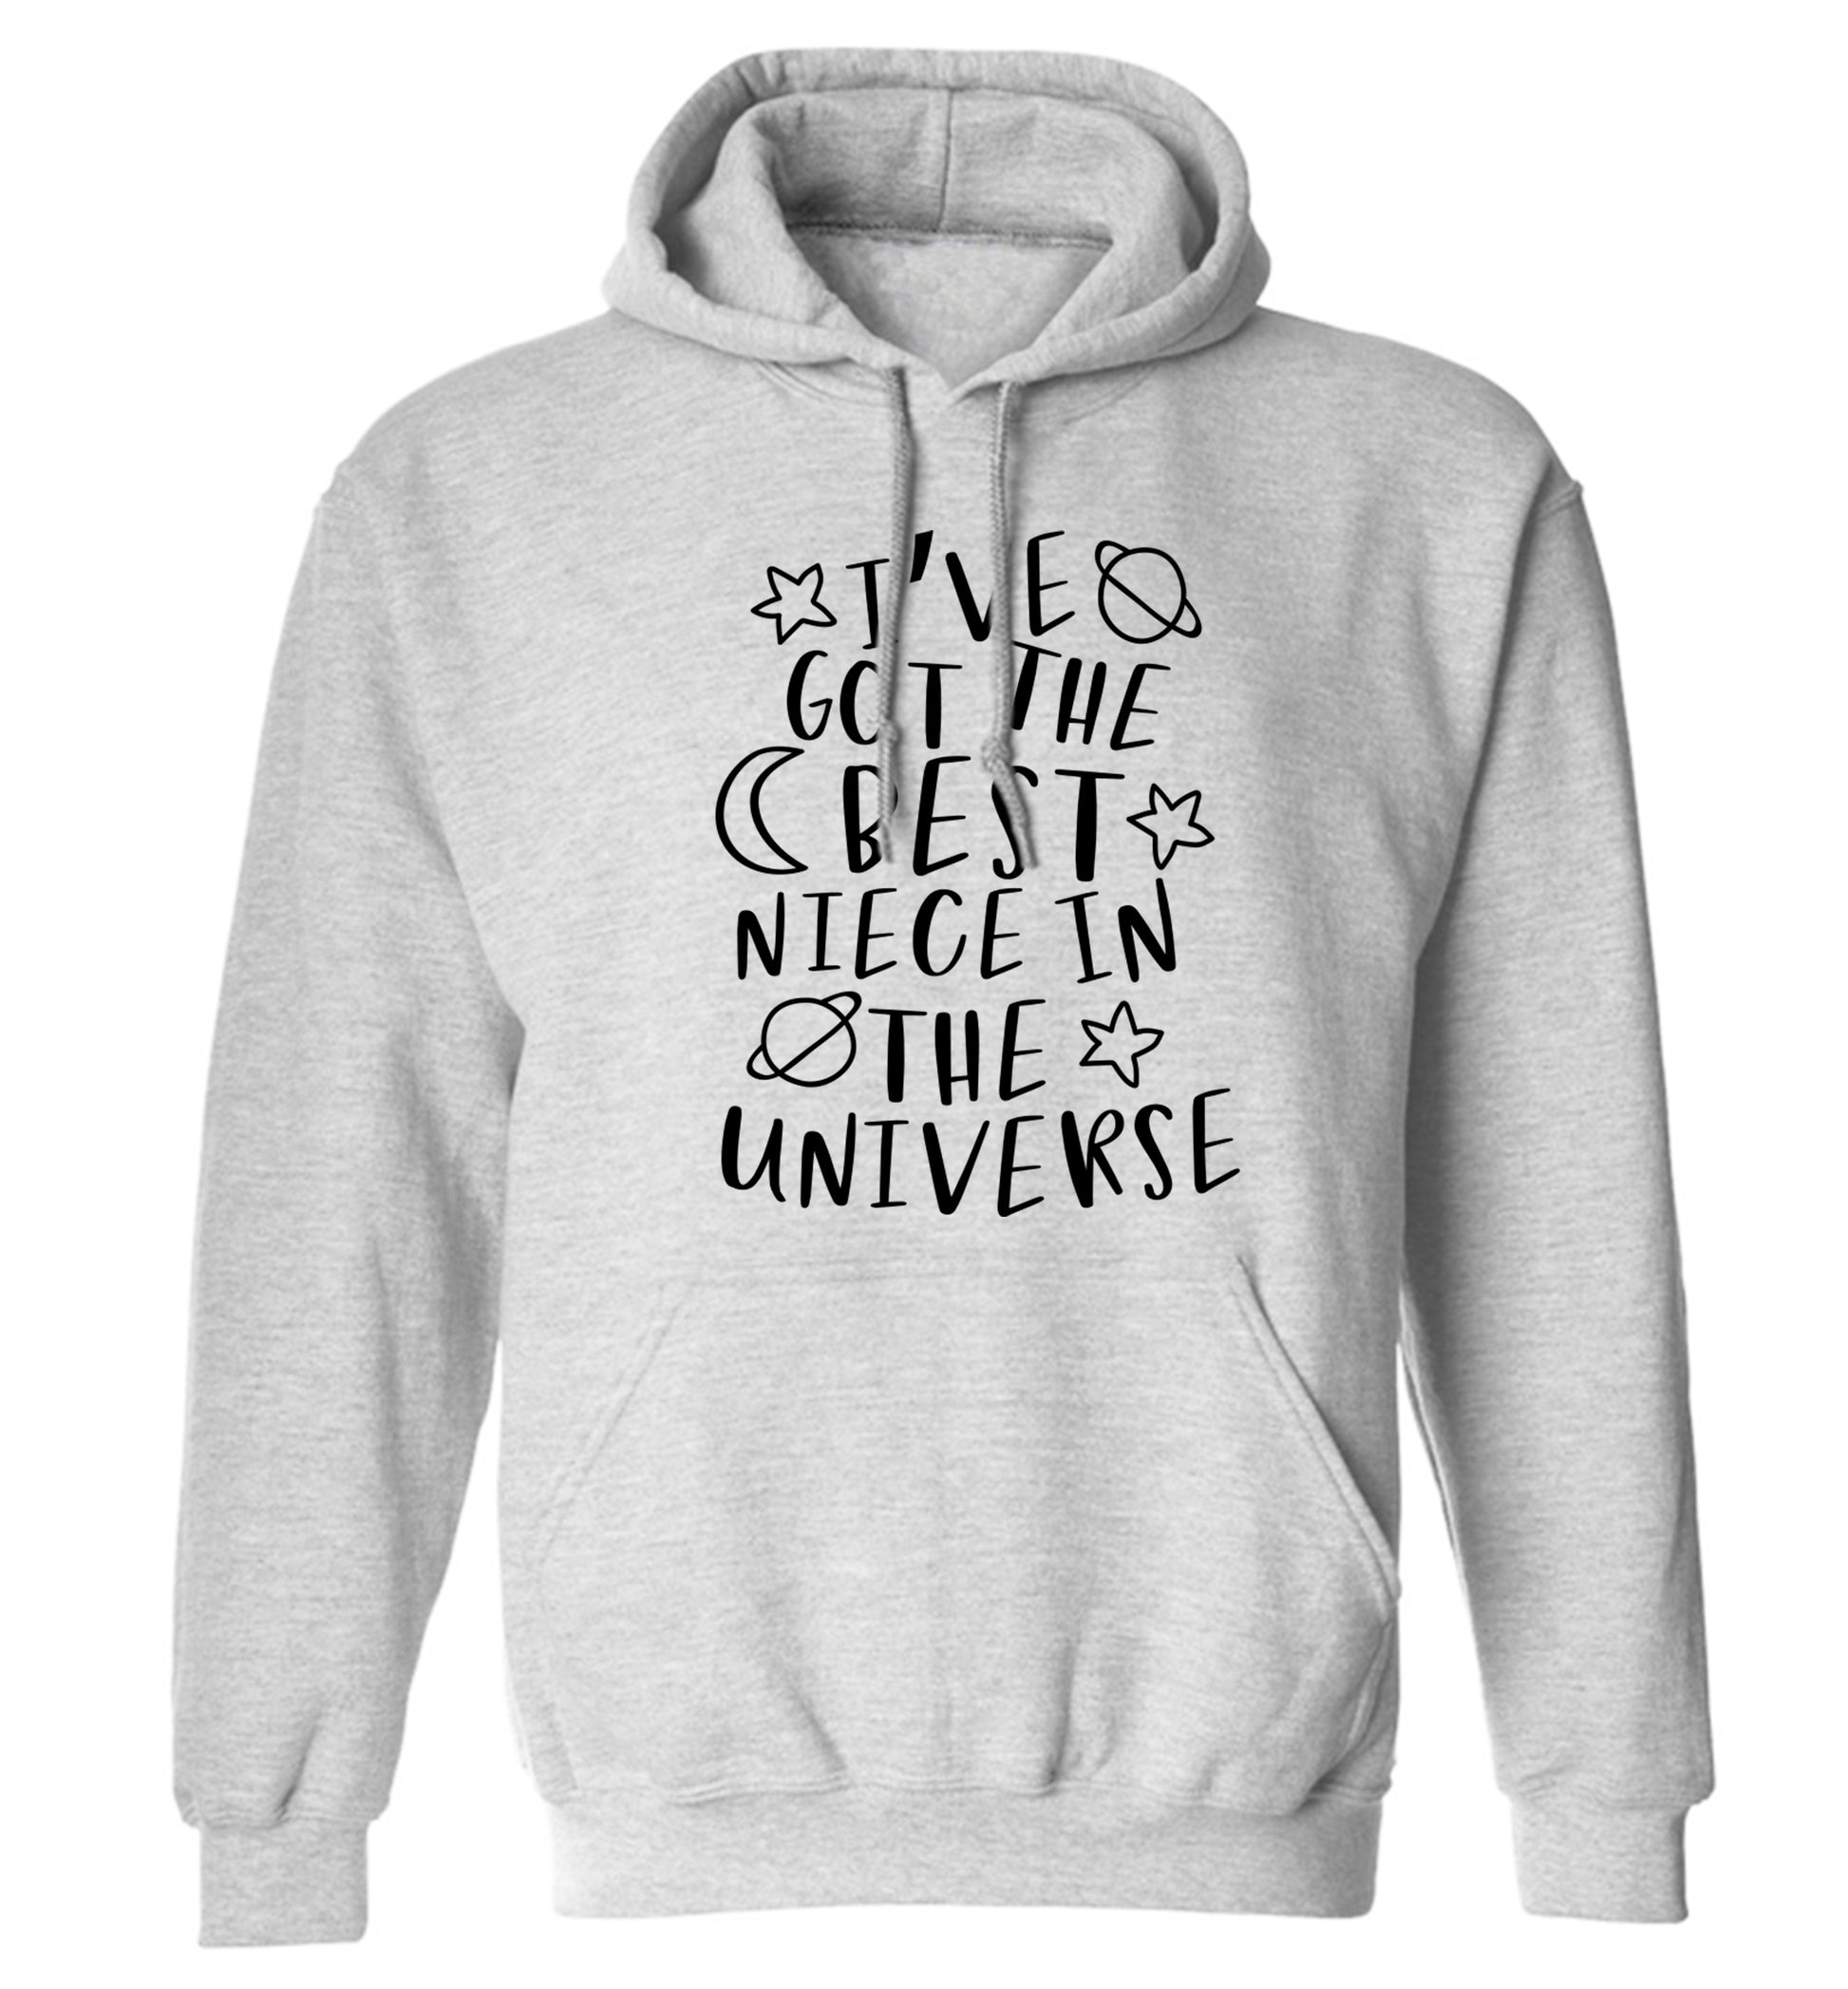 I've got the best niece in the universe adults unisex grey hoodie 2XL